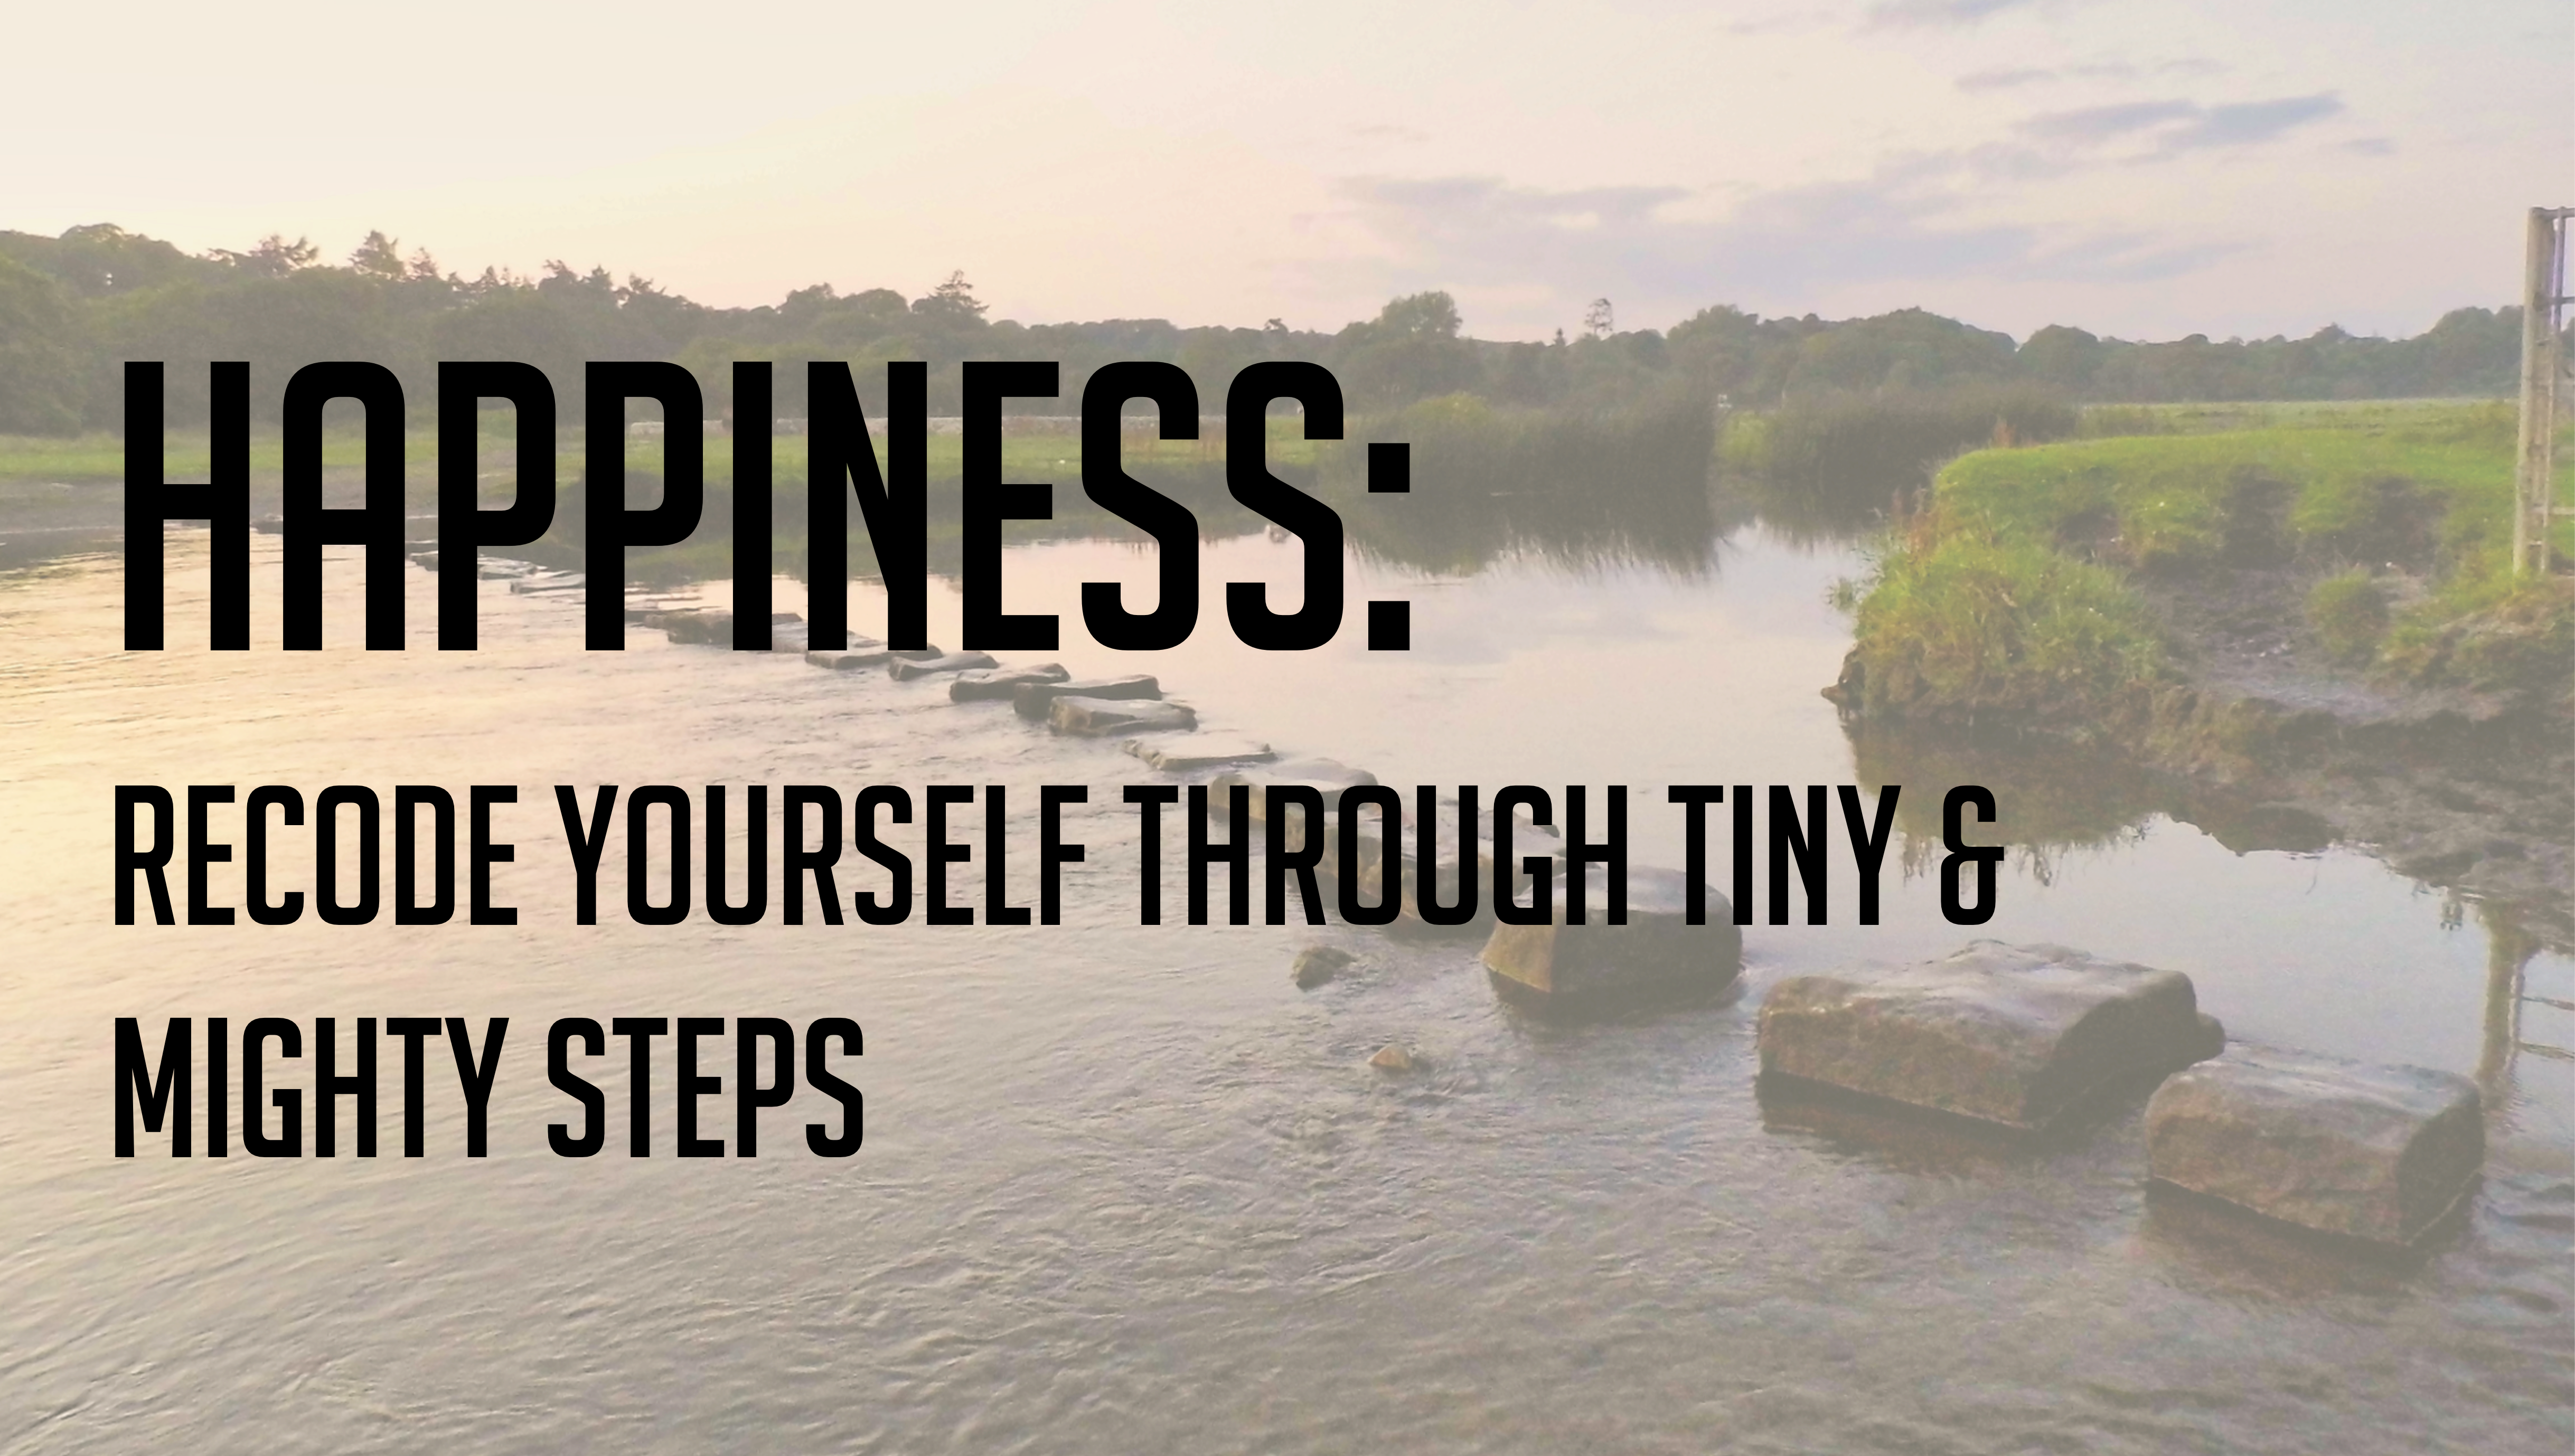 Recode Yourself for Happiness through Tiny & Mighty Steps